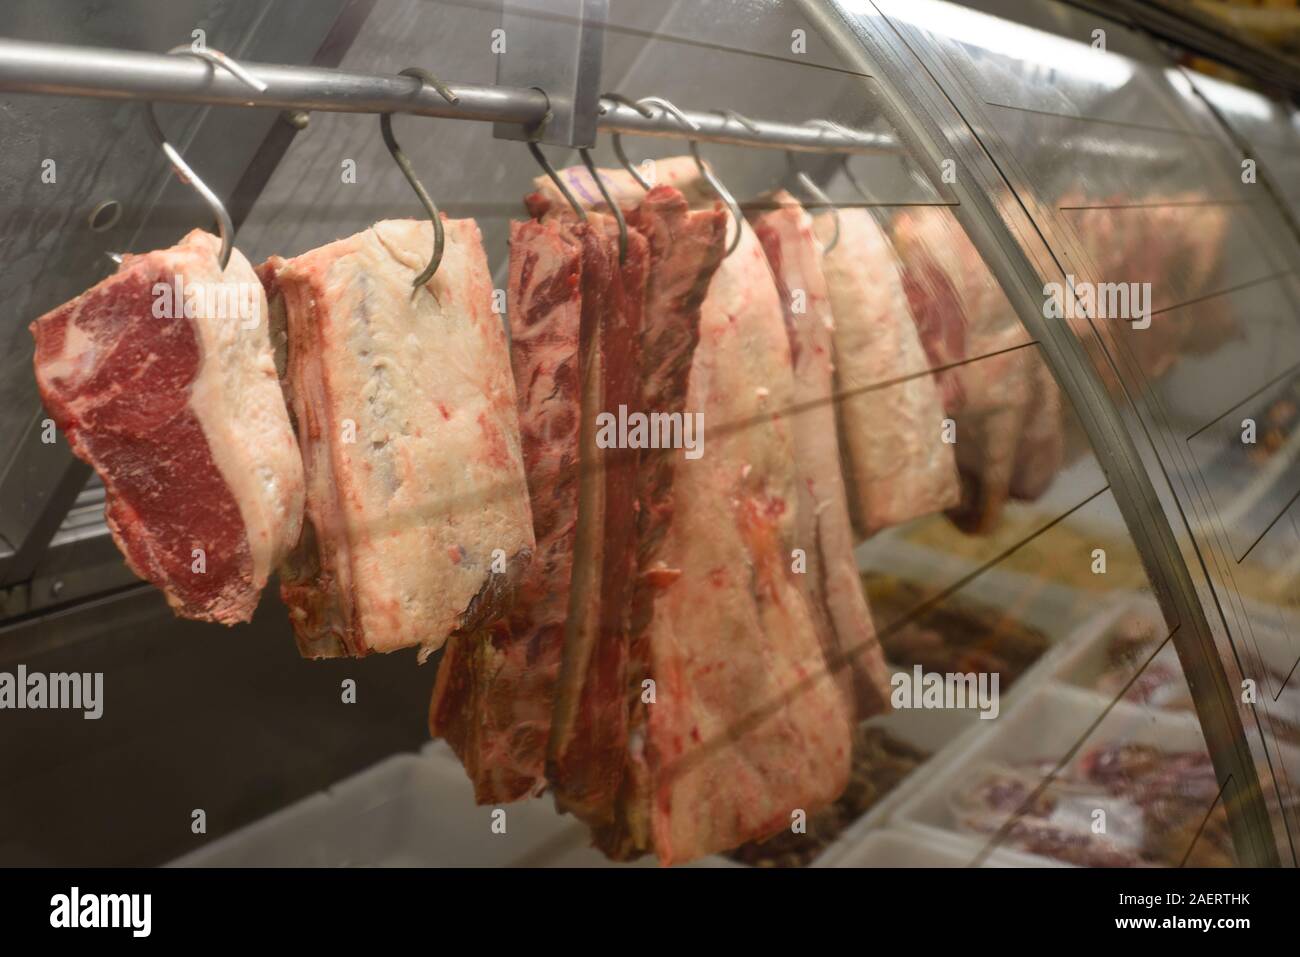 Meat hanging from hooks at the butchery Stock Photo